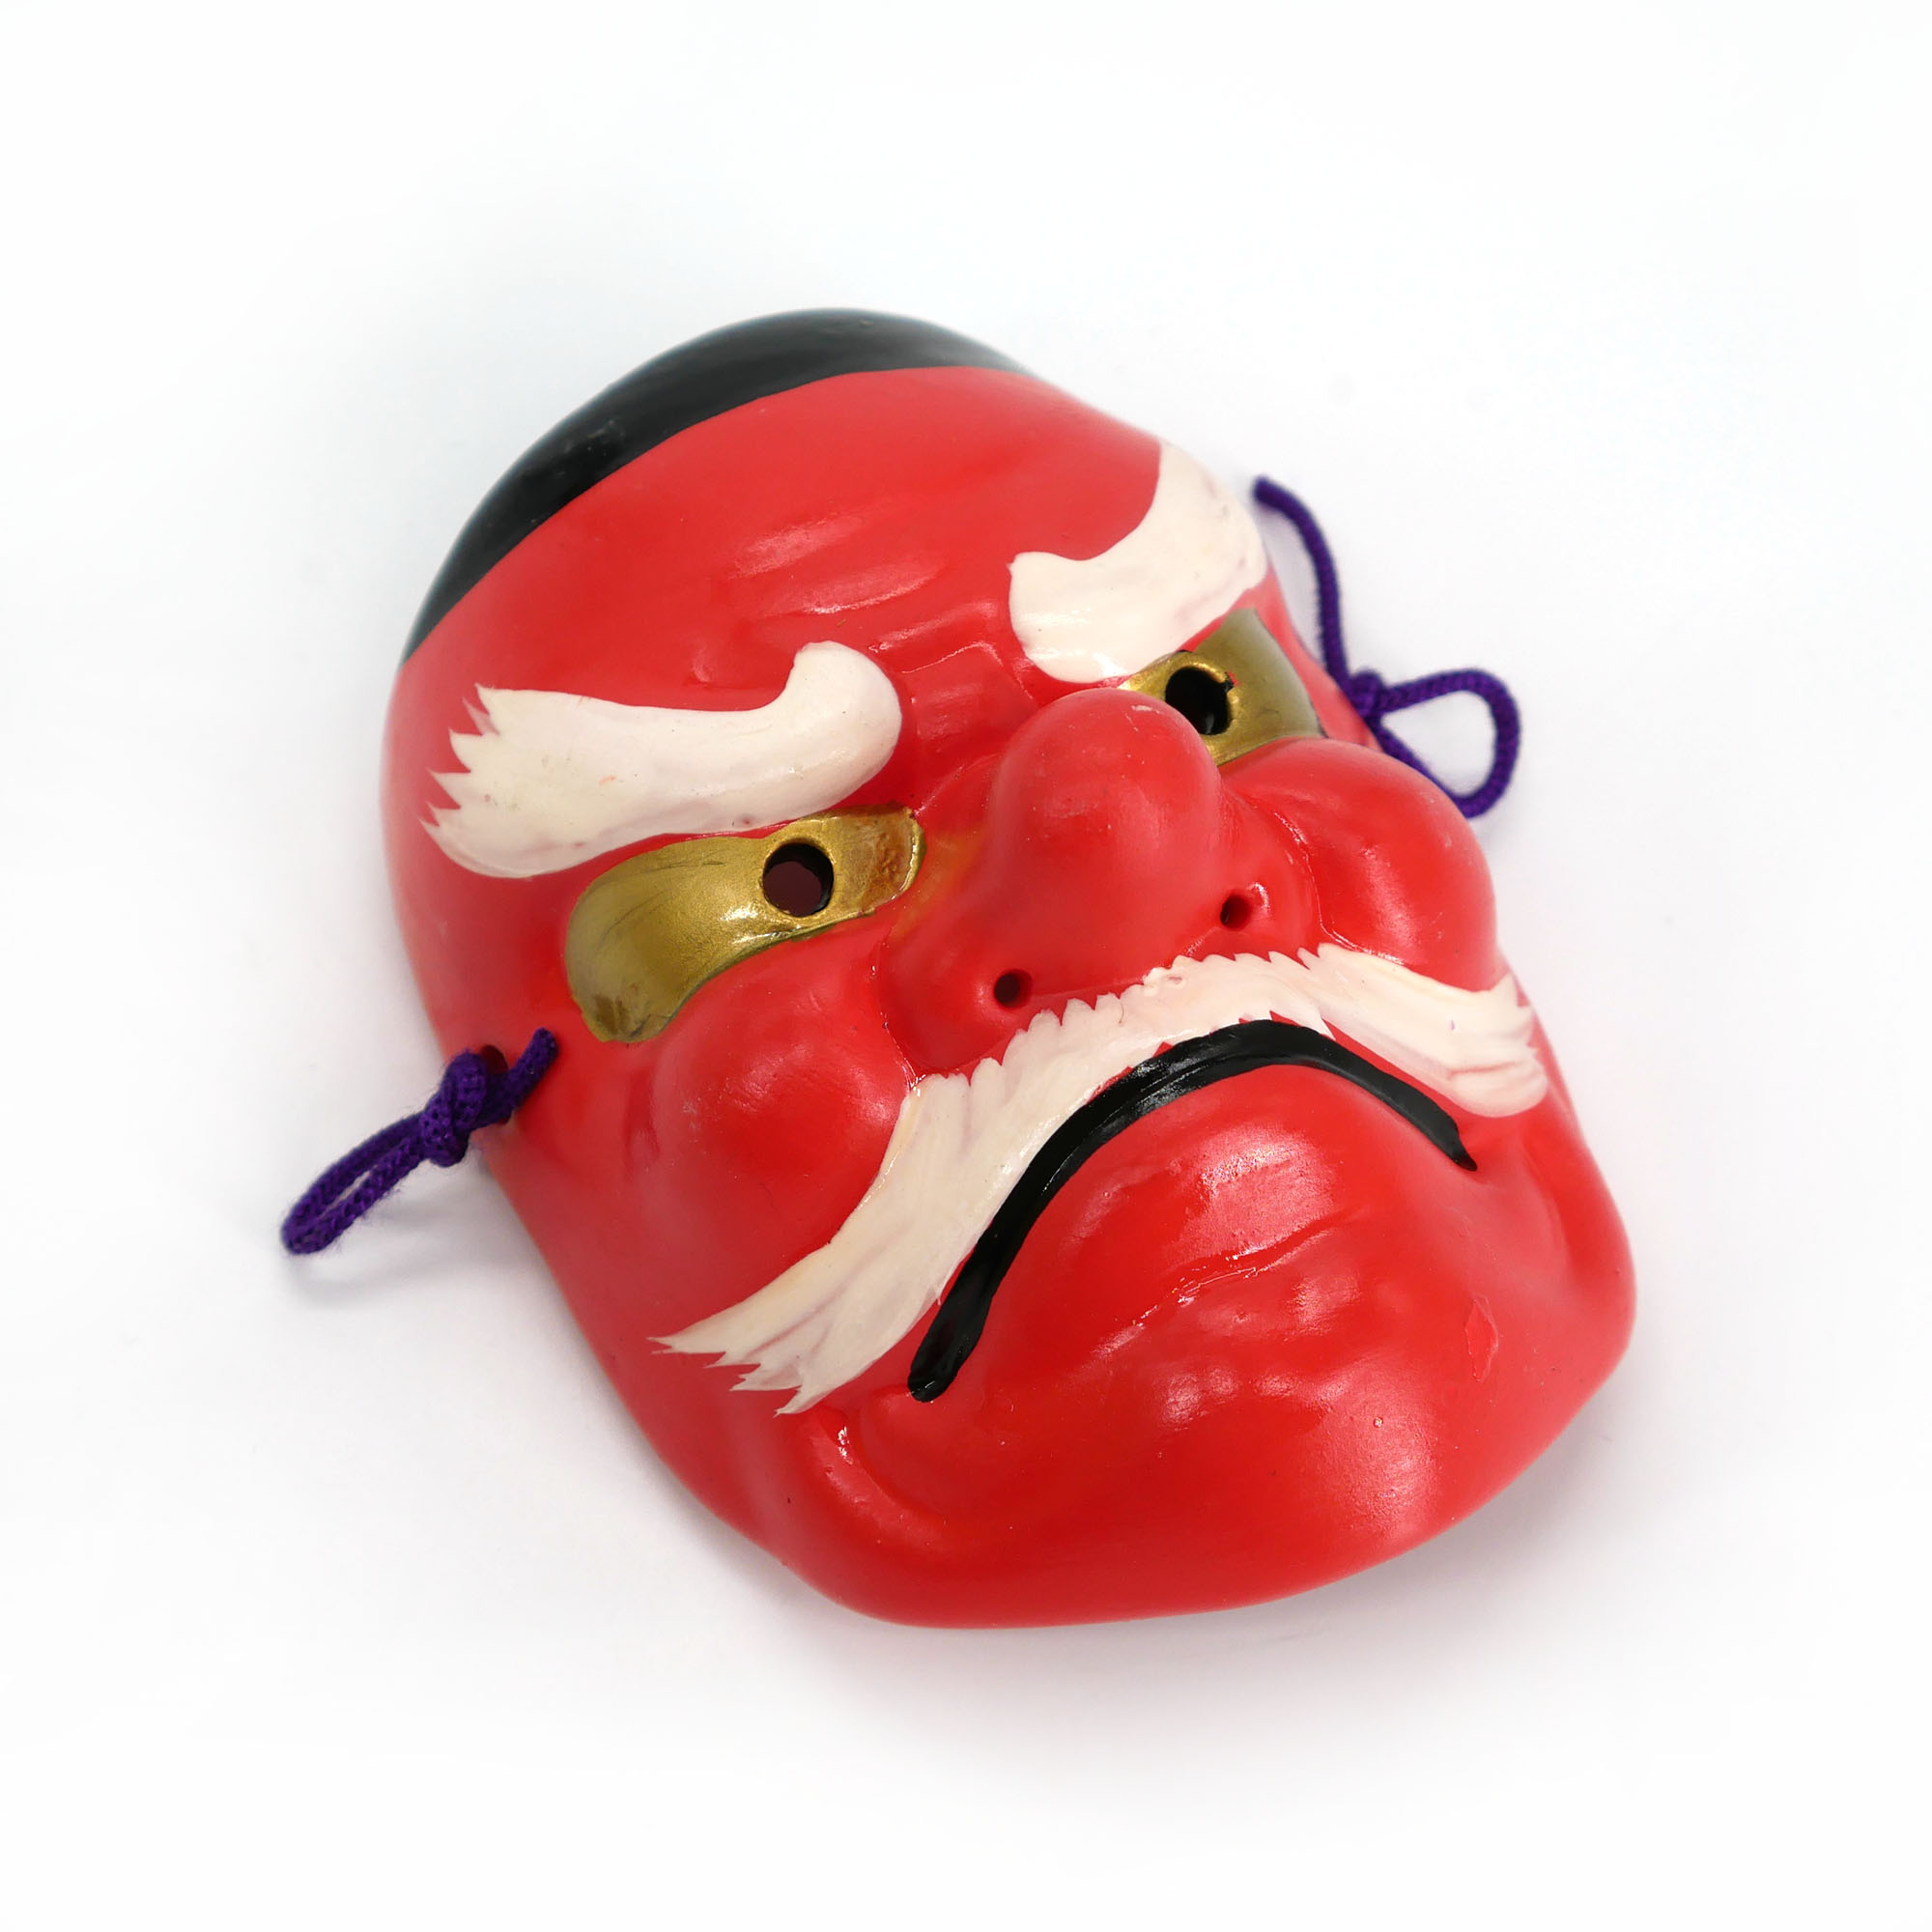 Japanese red and white cat mask